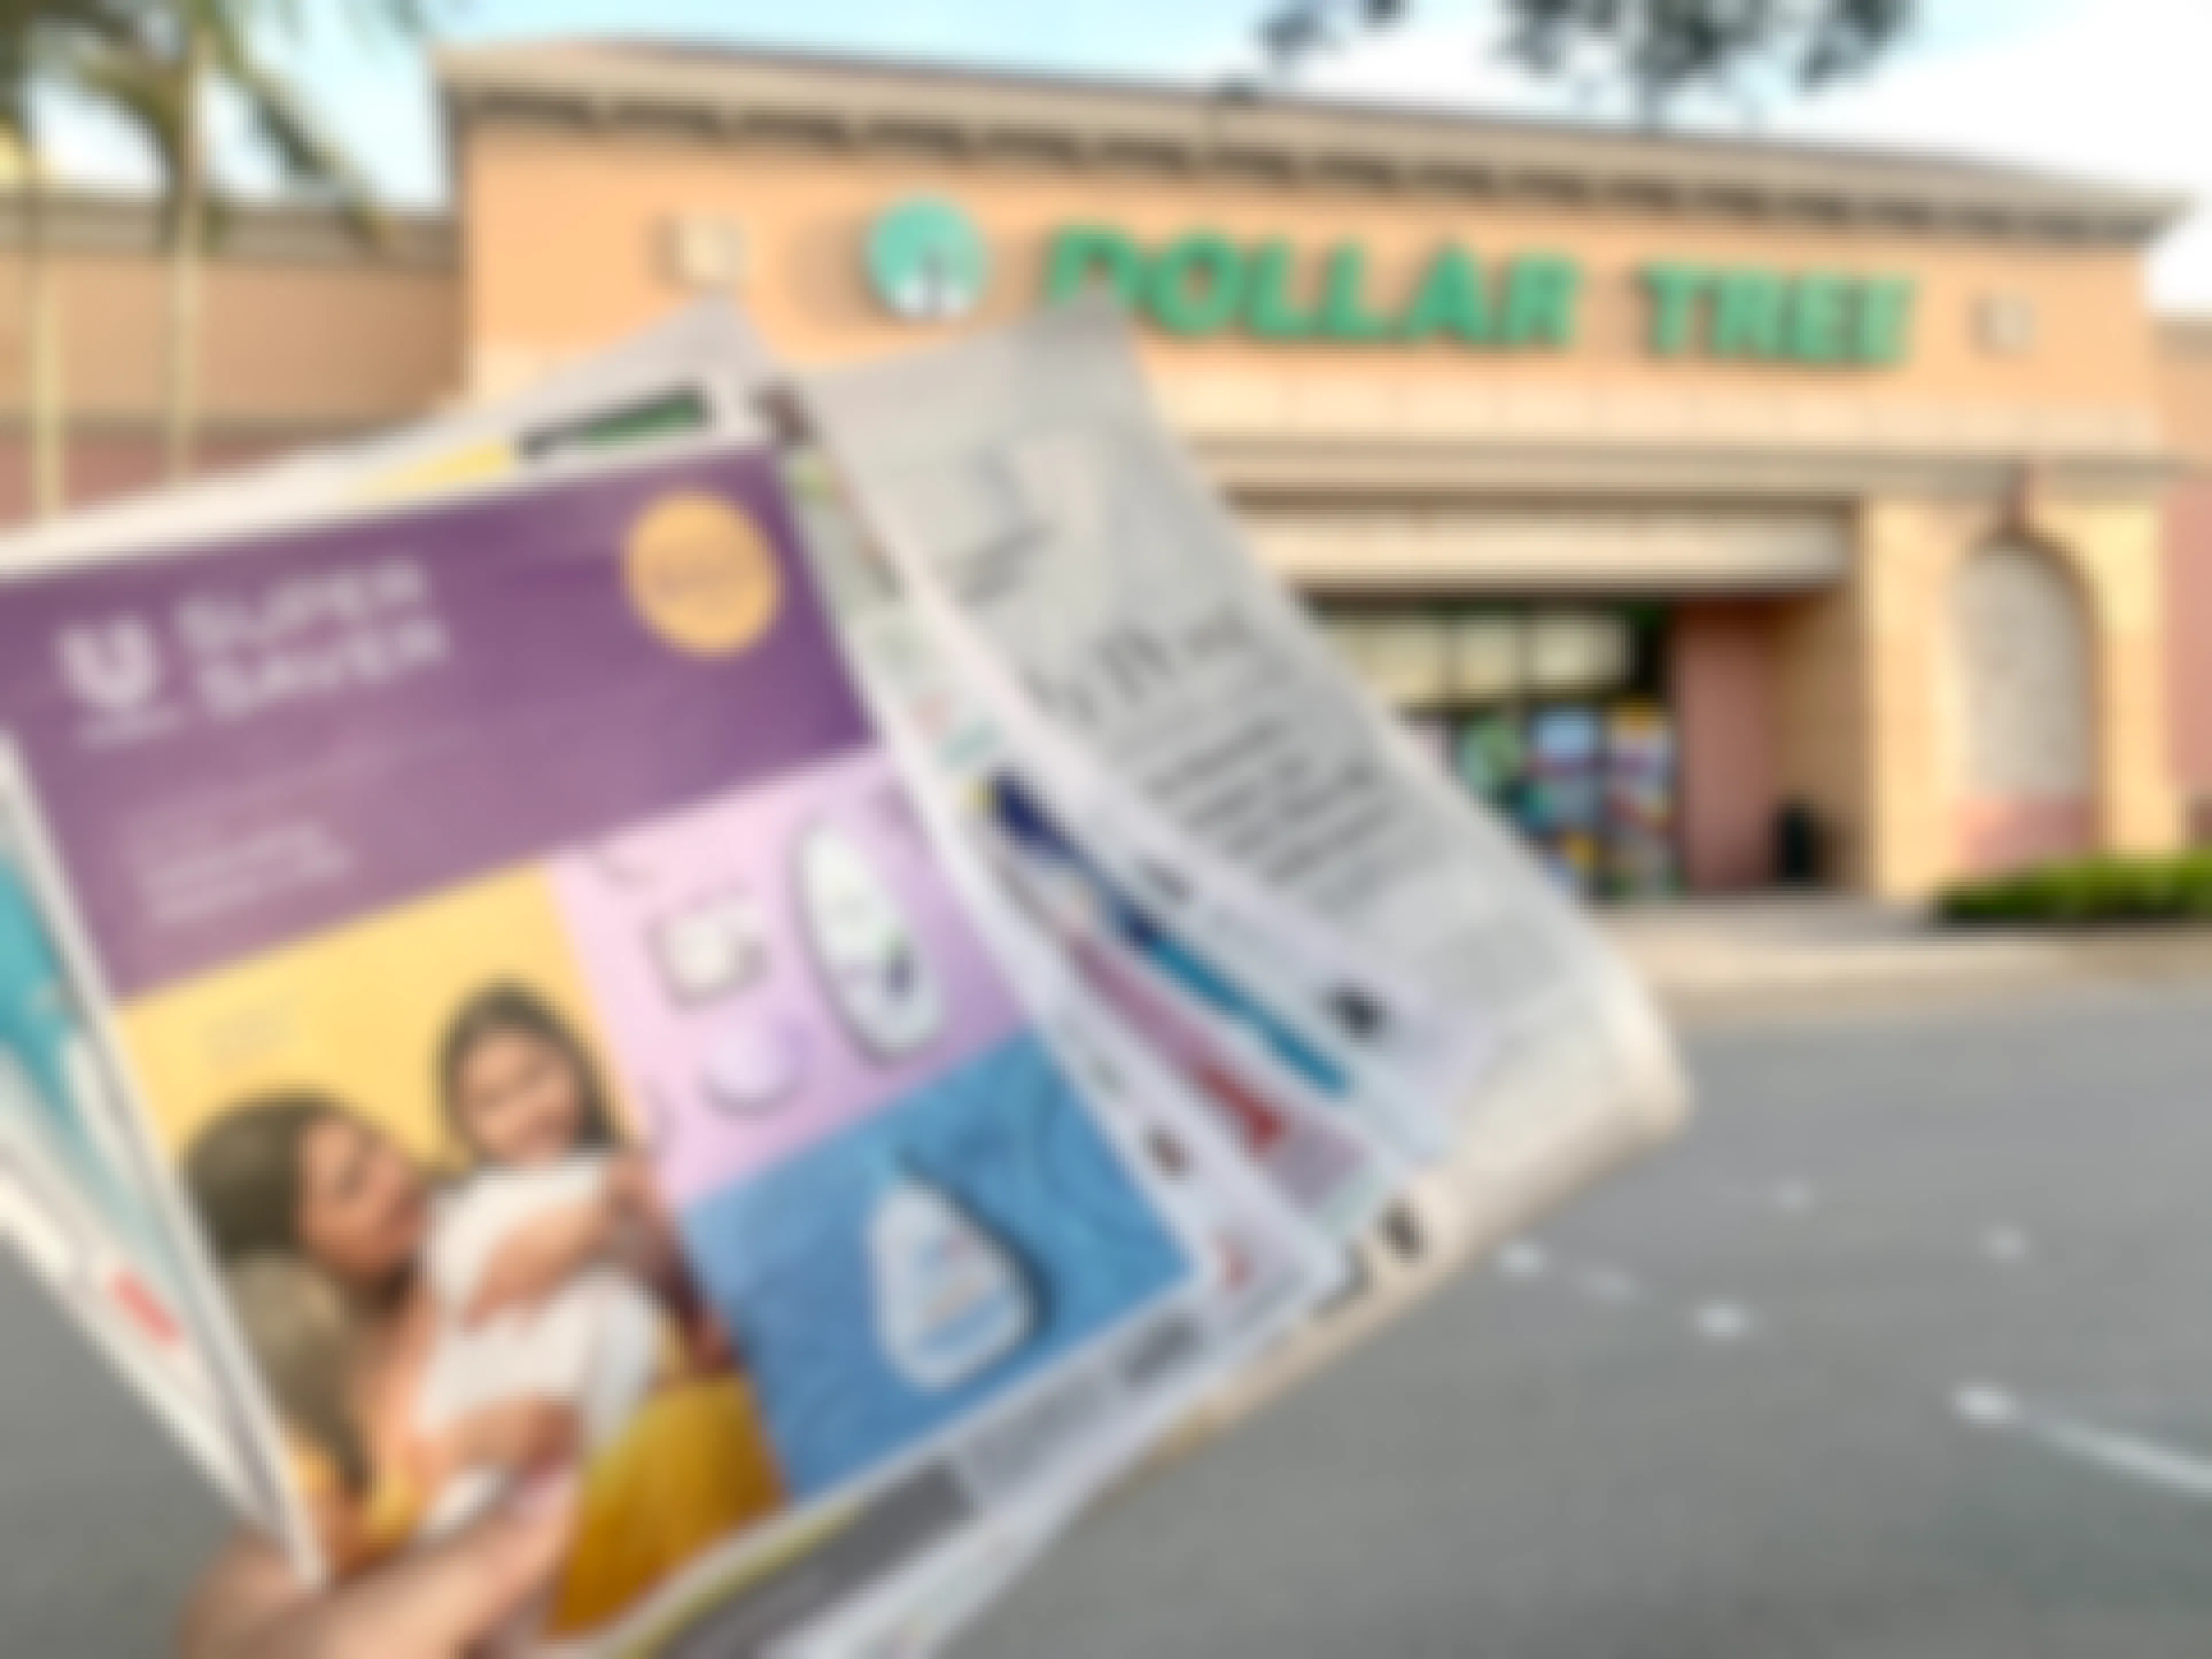 sunday newspaper being held up in front of dollar tree strore